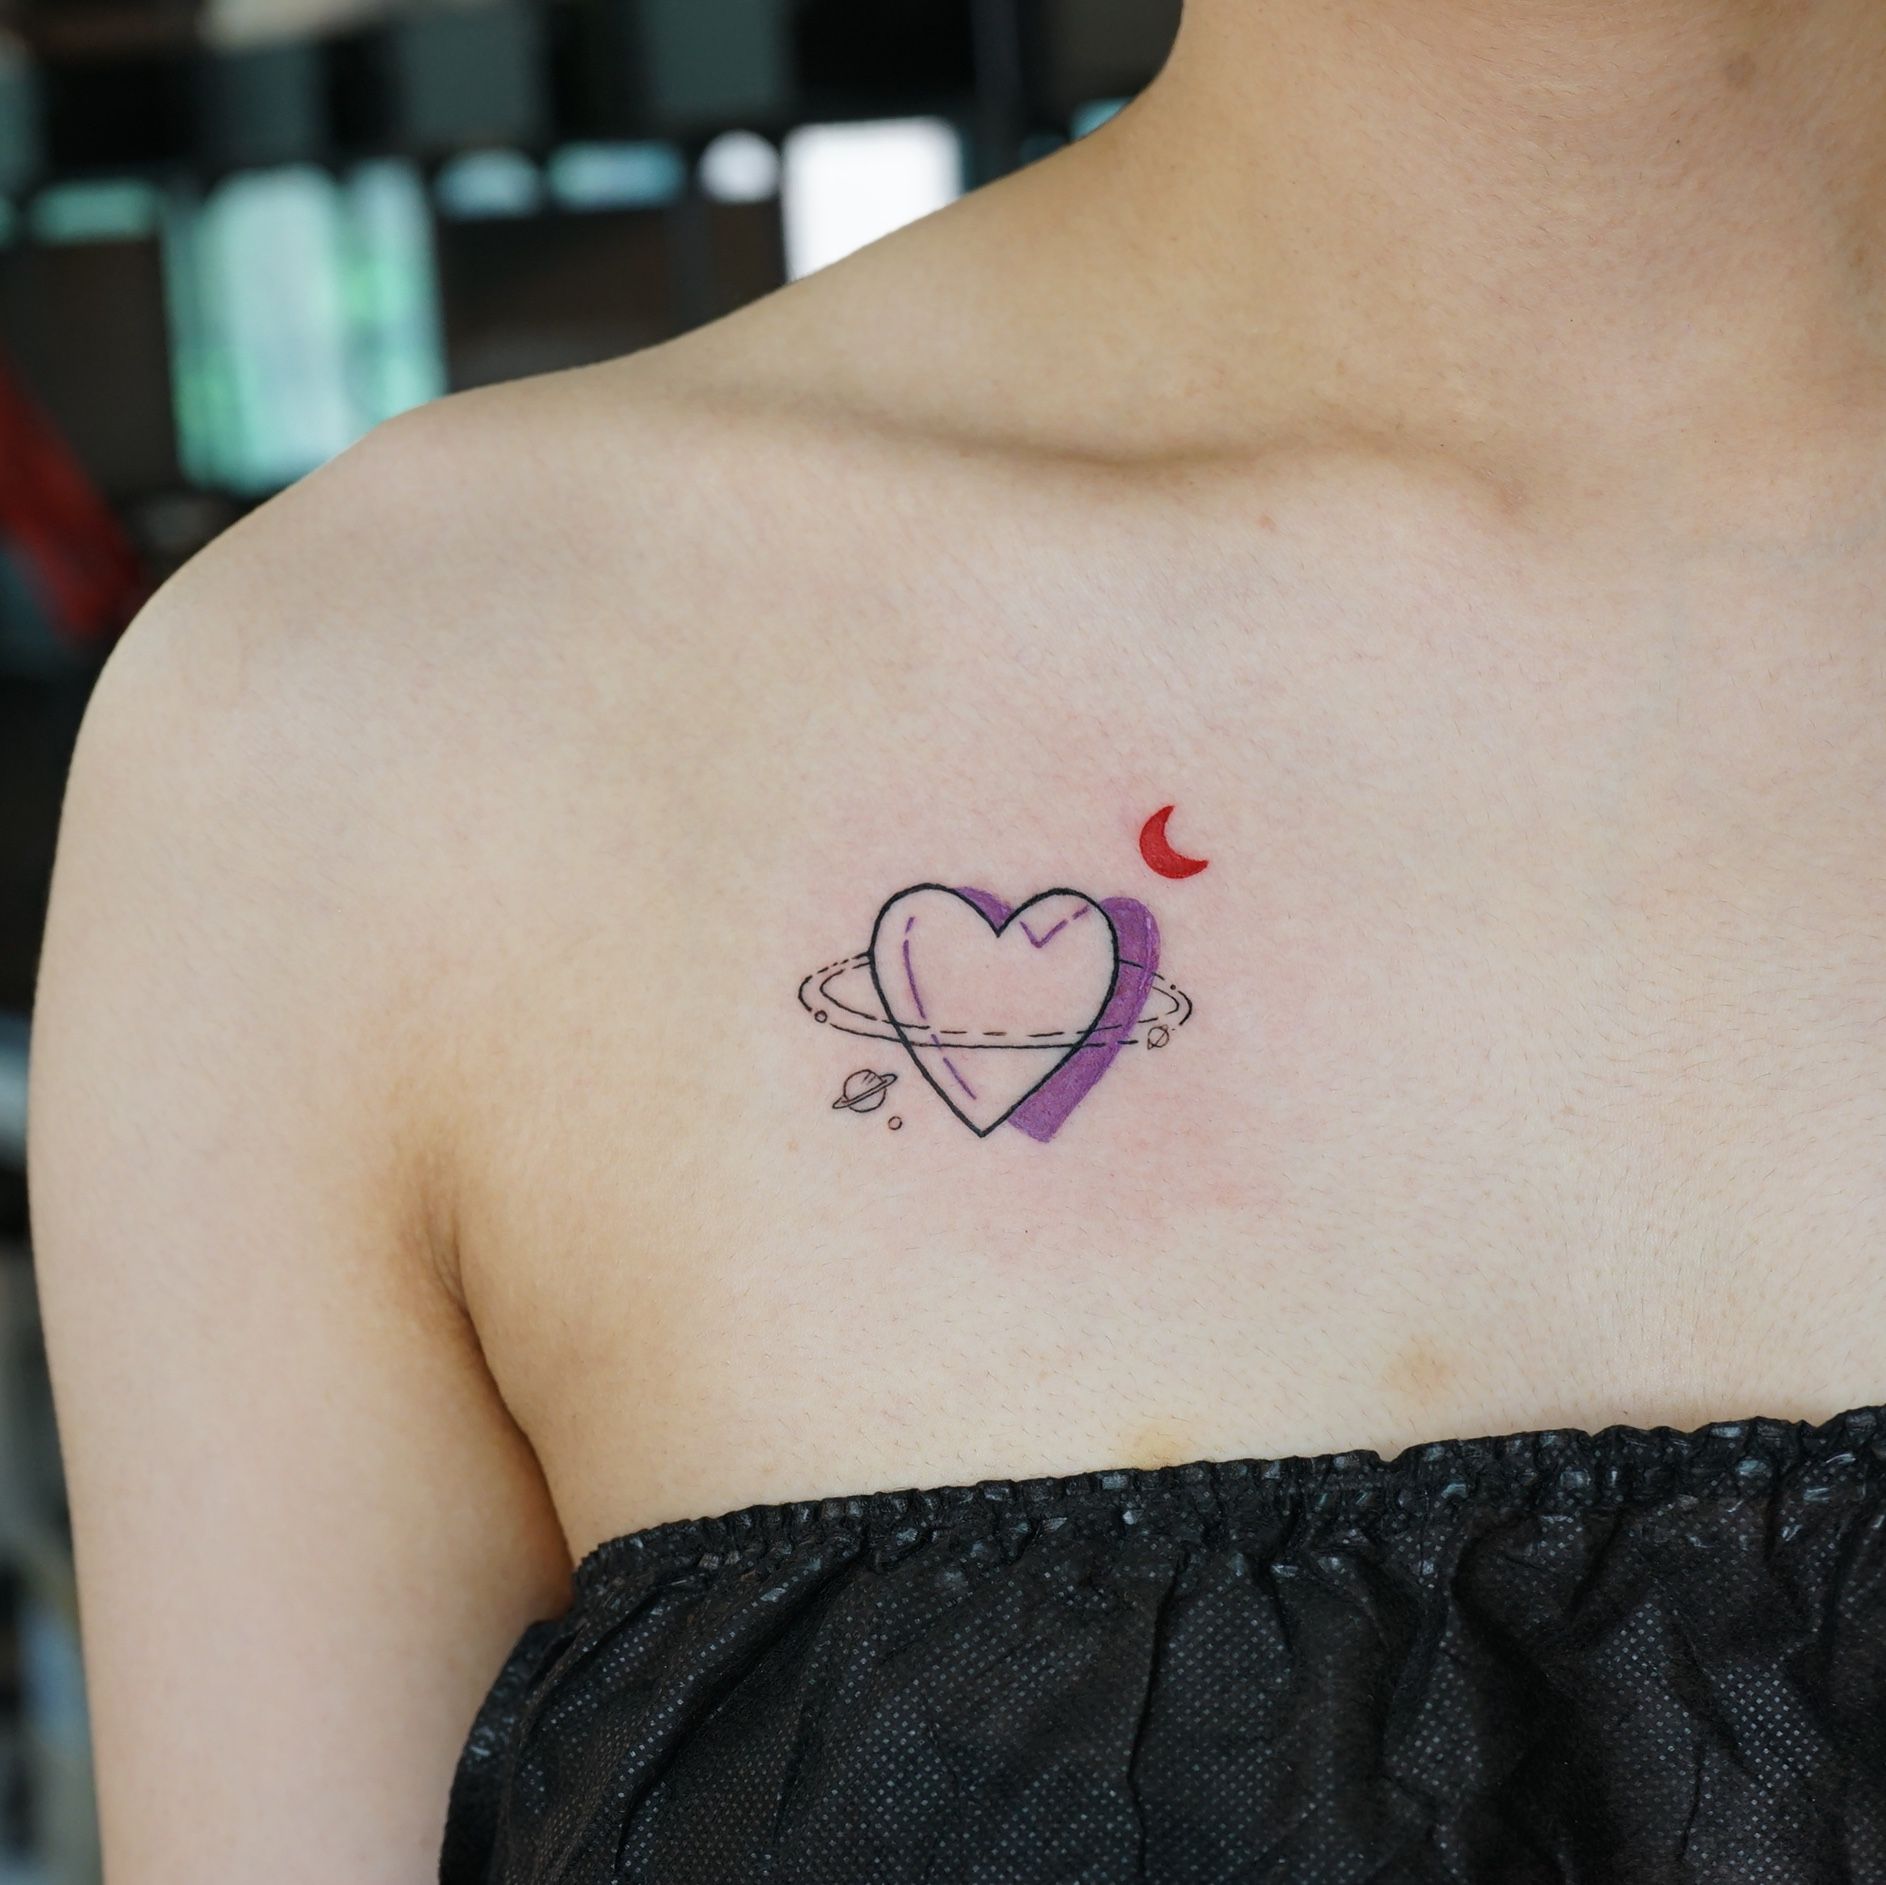 Watercolor style heart tattoo on the wrist.